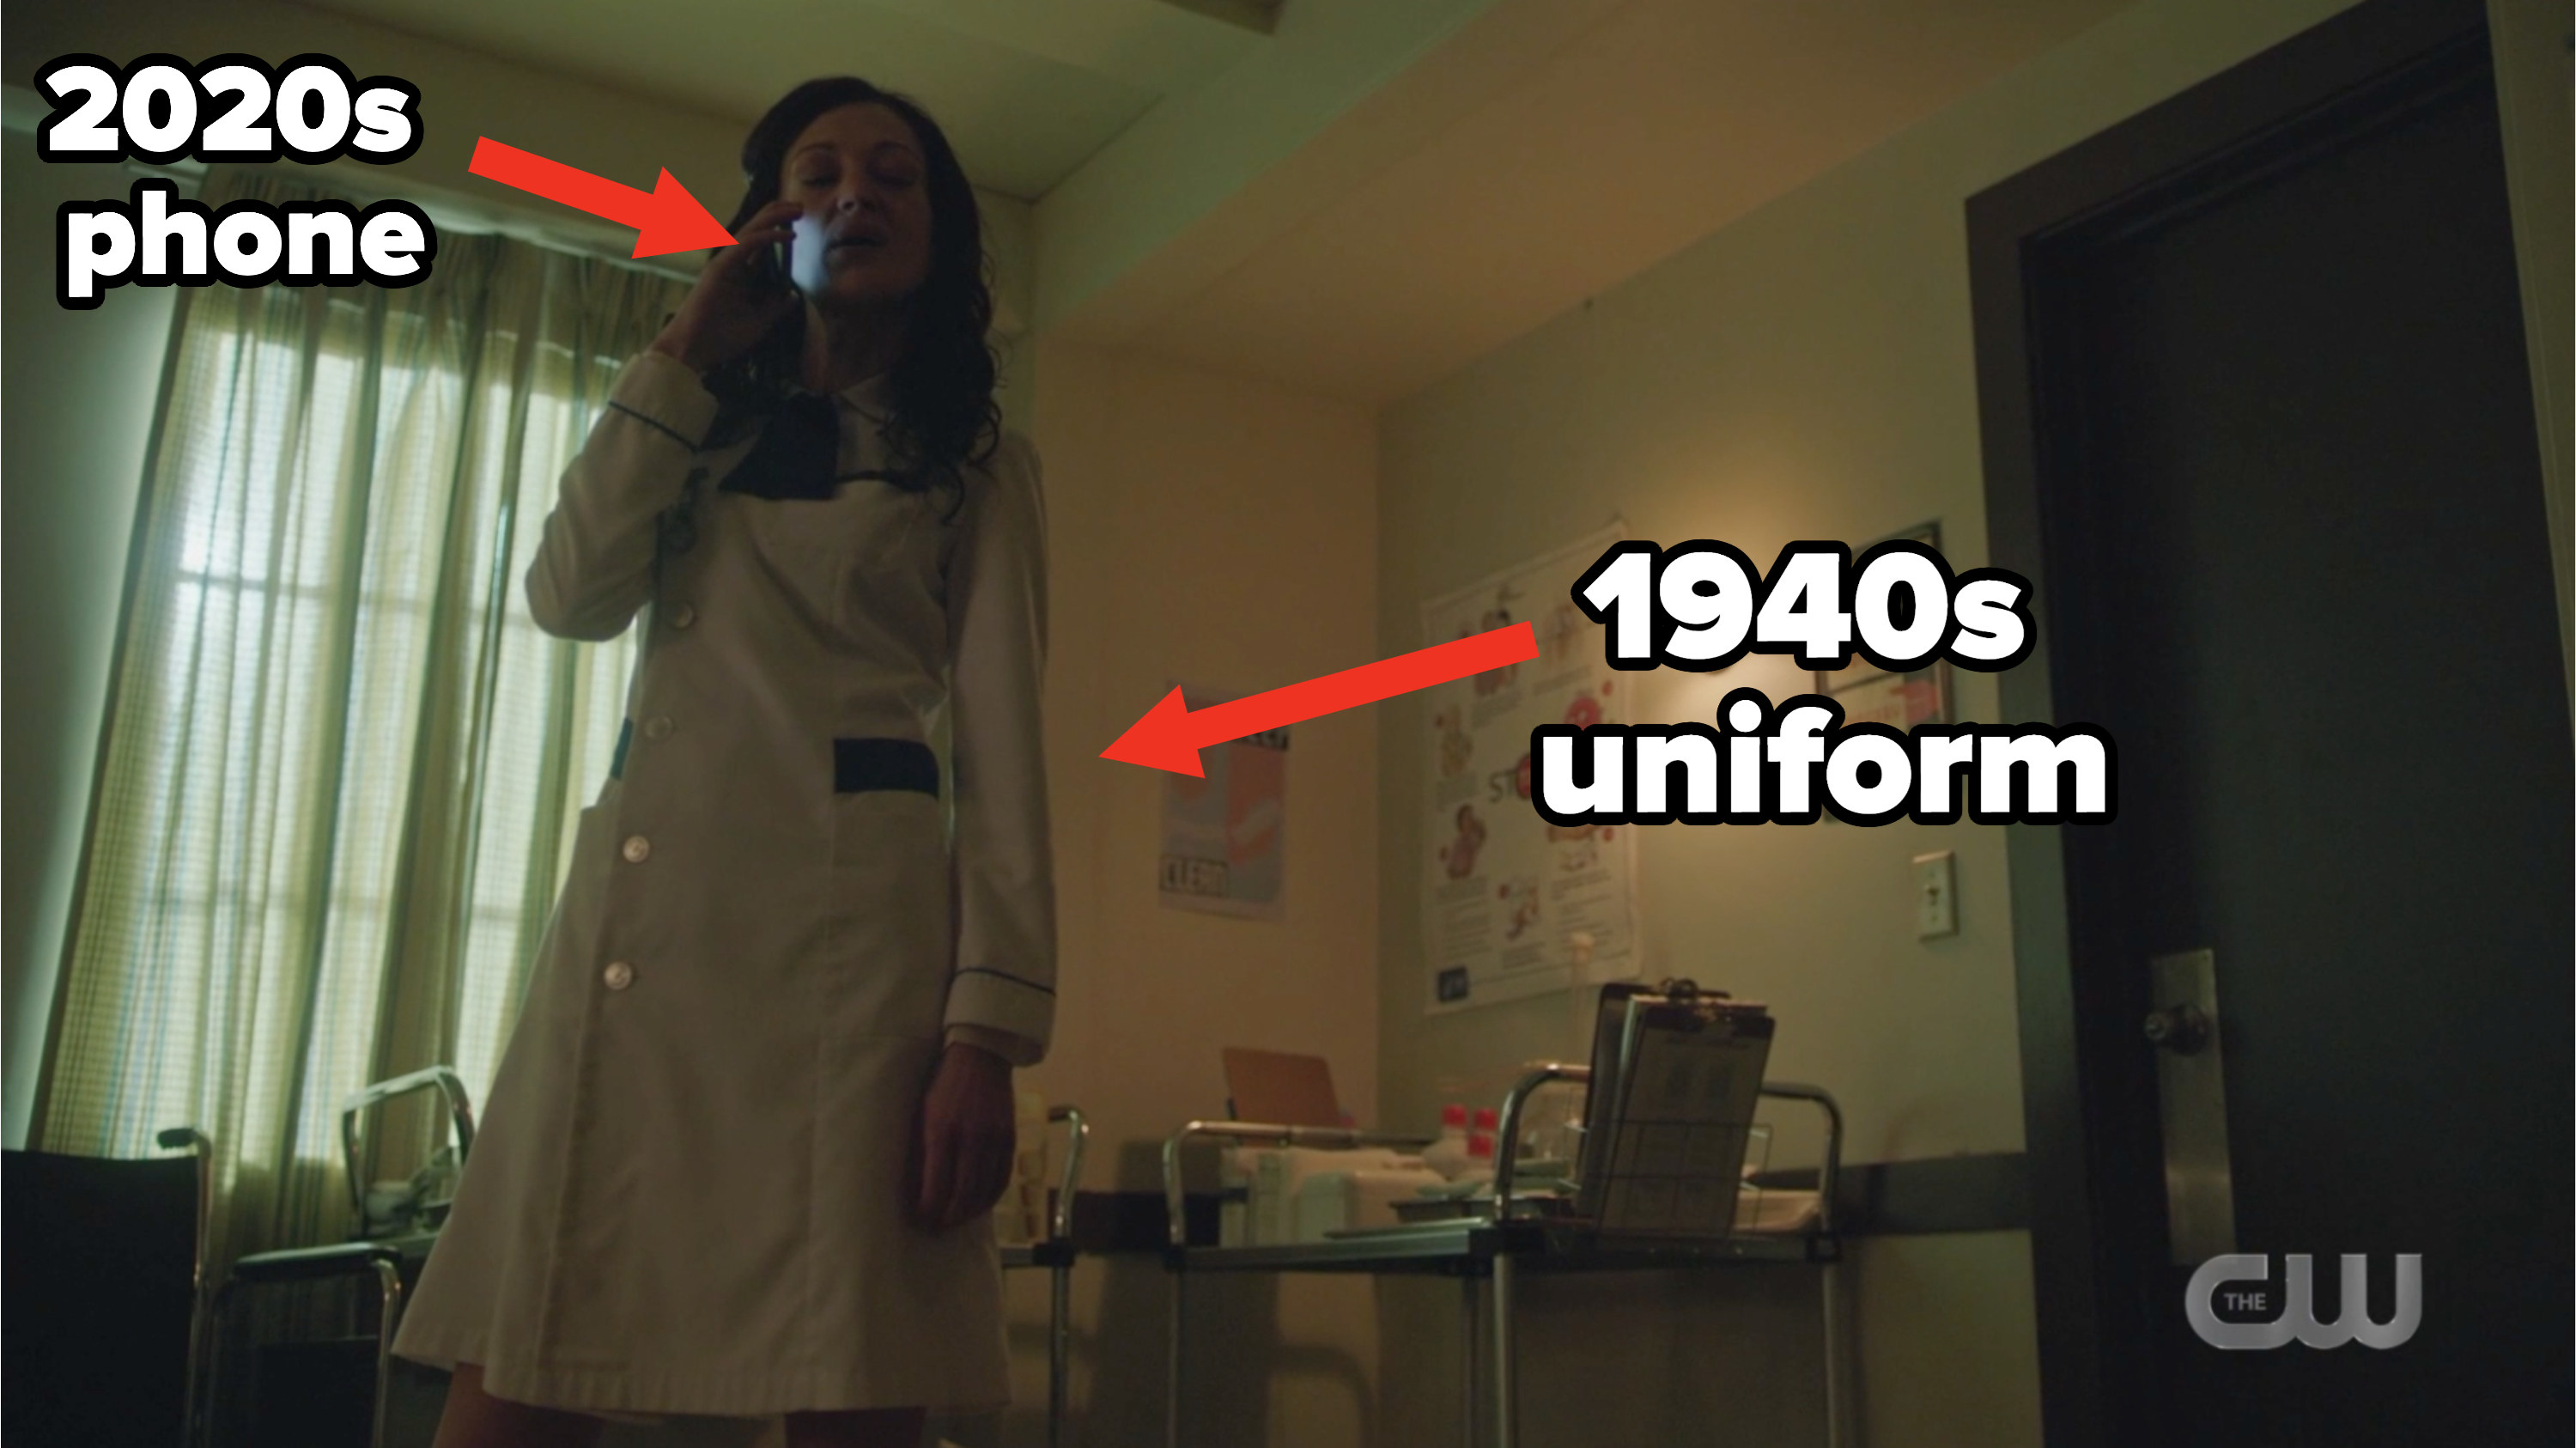 Darla with the caption pointing to her 2020s phone and her 1940s uniform